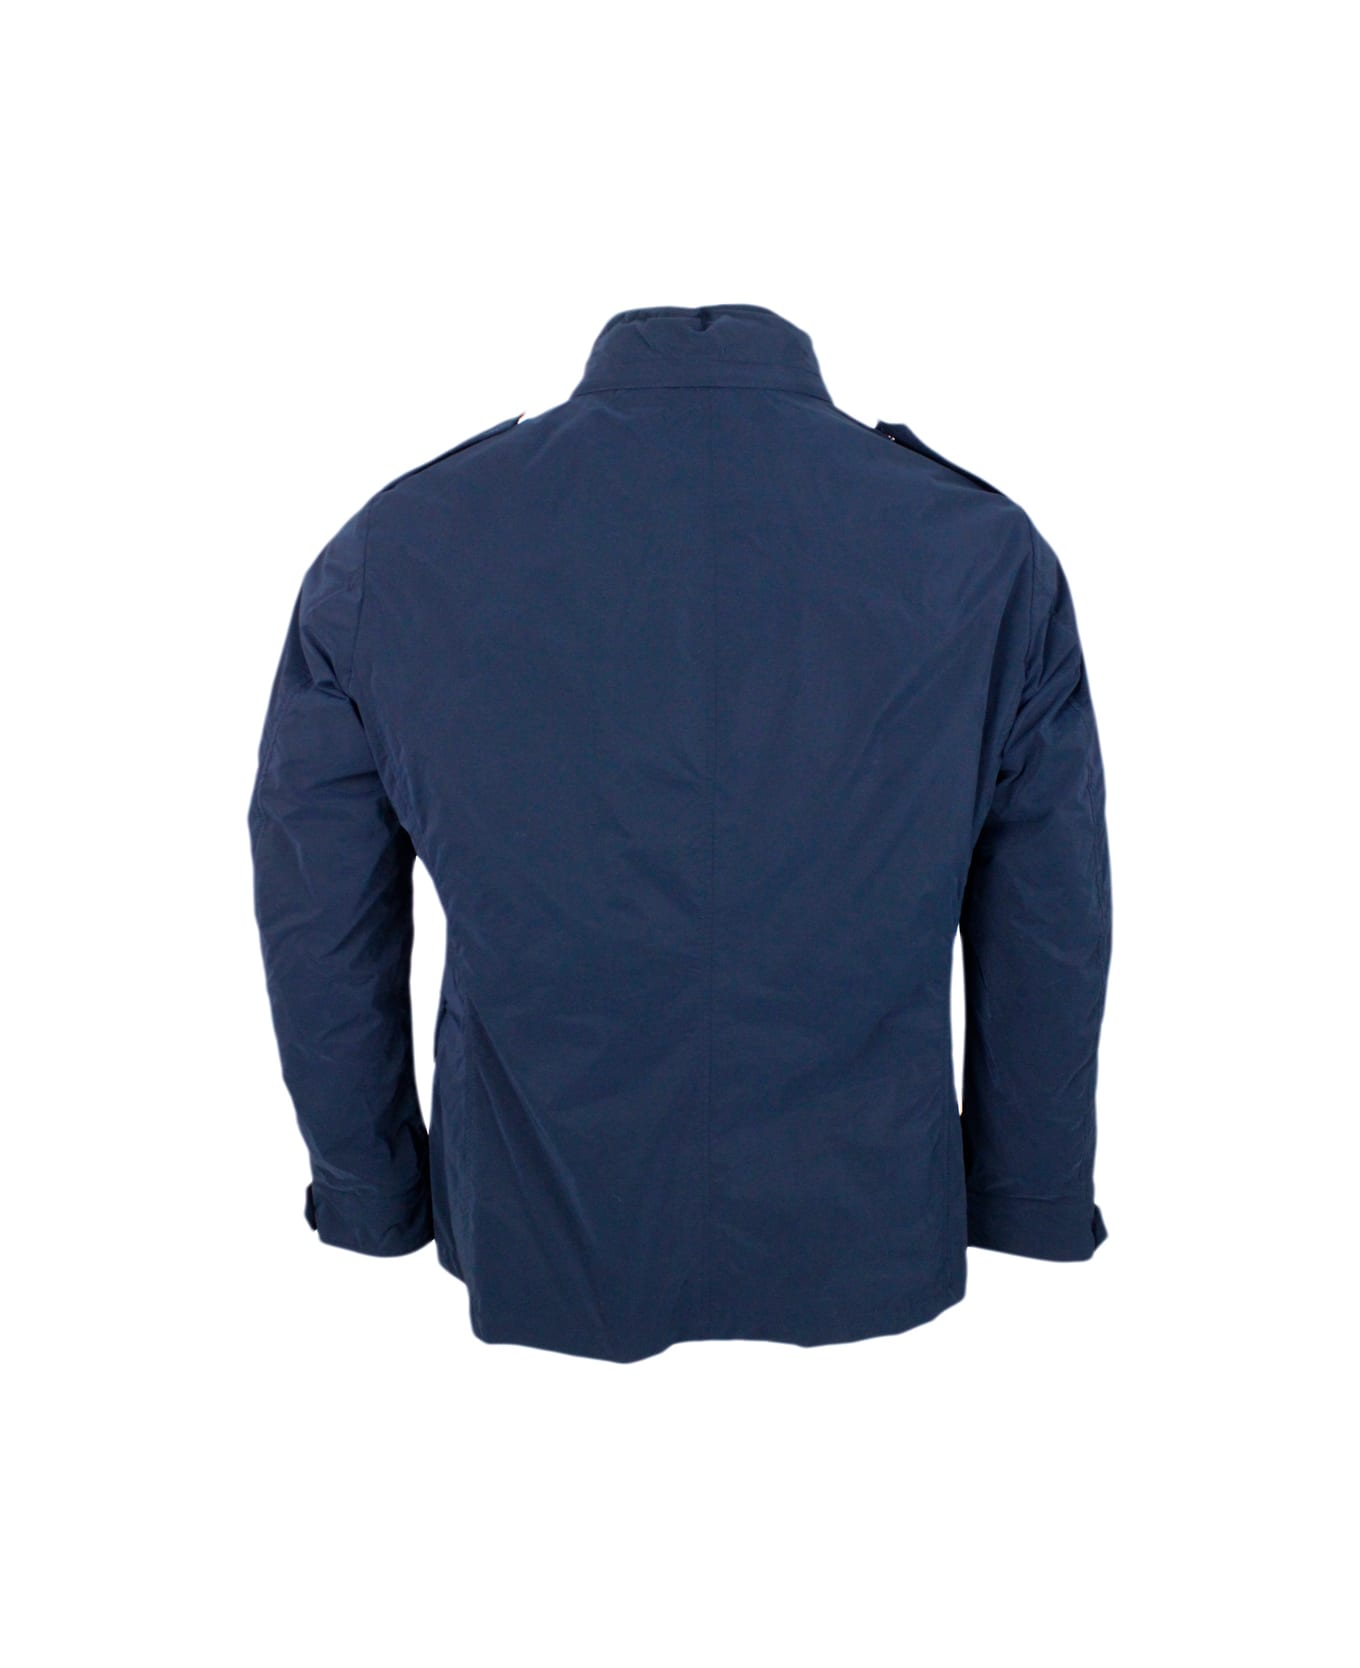 Moorer Lightweight Windproof Field Jacket Model In Technical Fabric With Concealed Hood And Zip And Button Closure - Blu